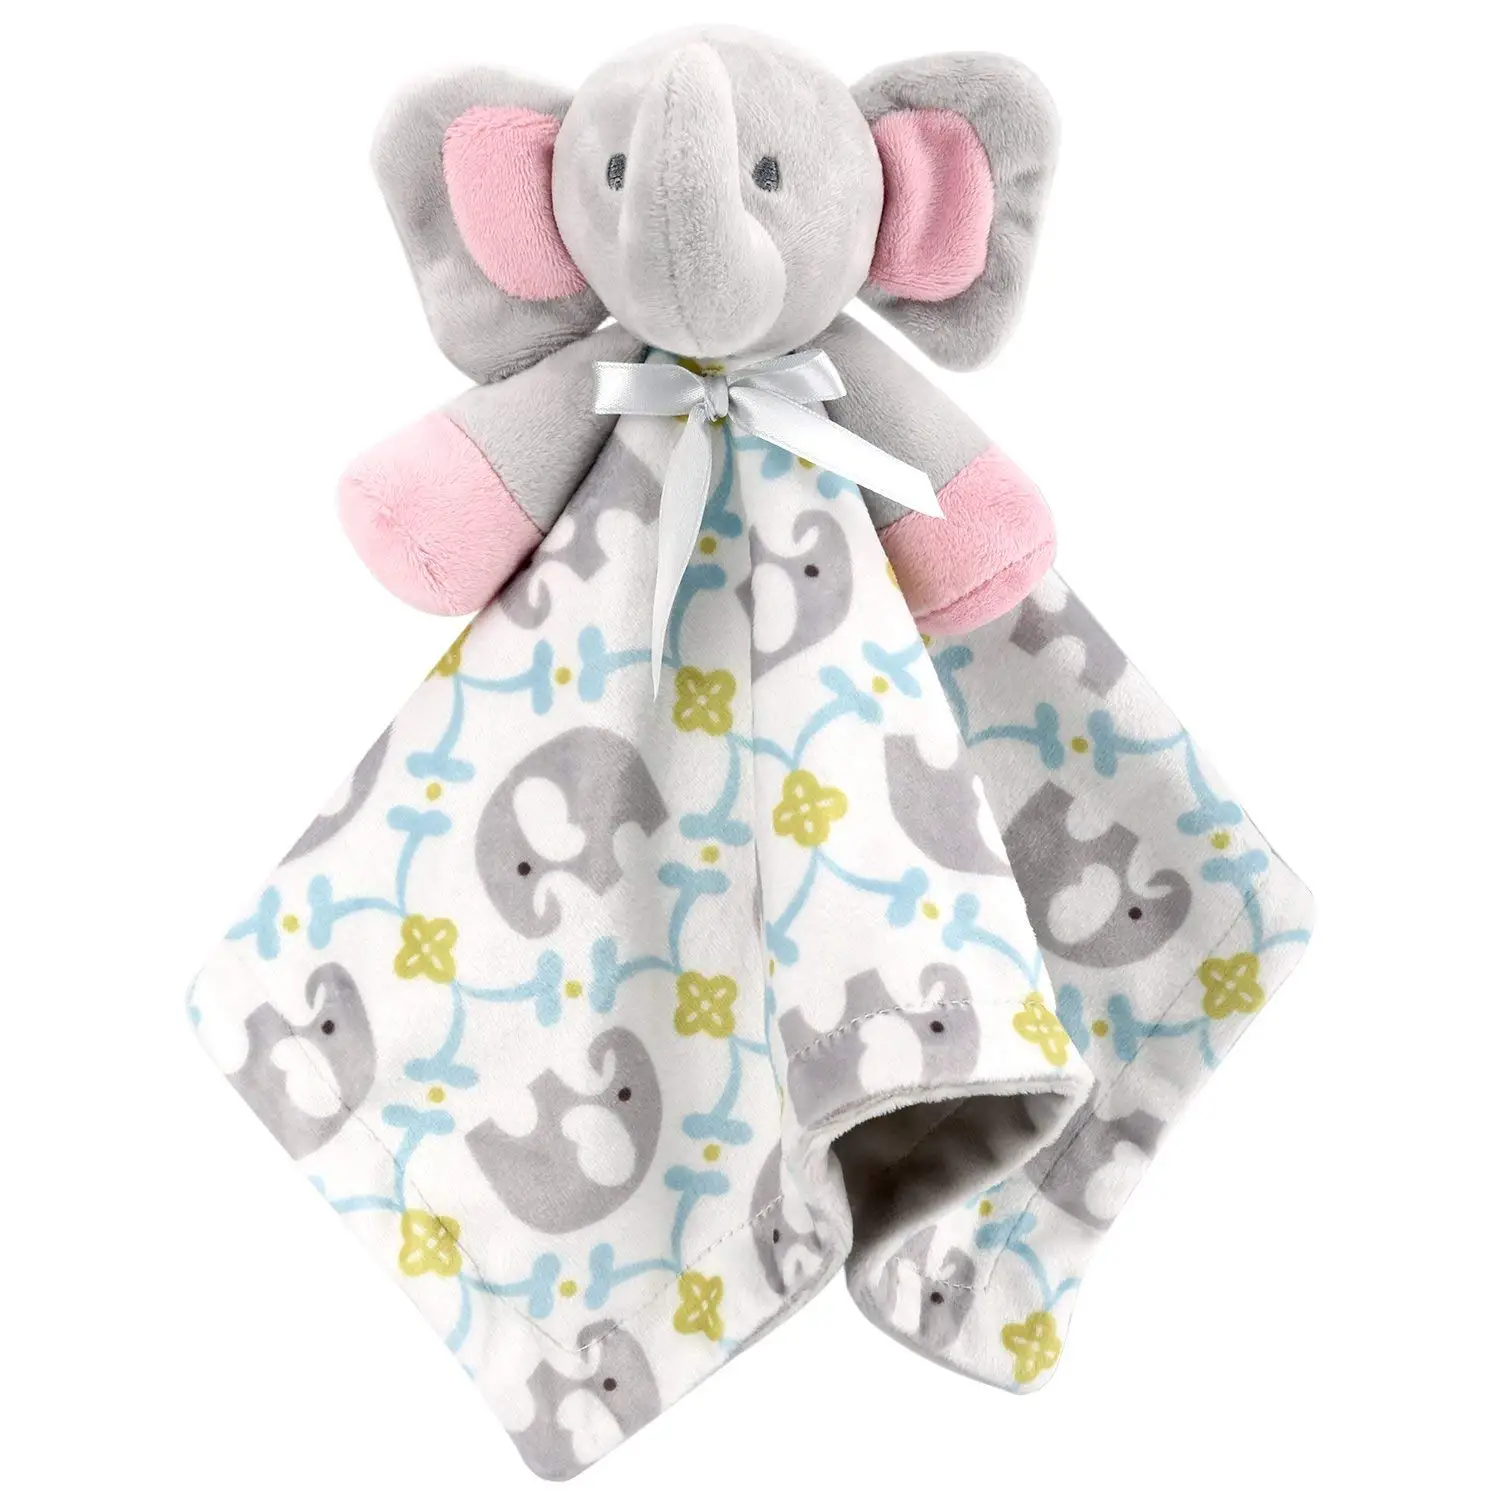 Cheap Baby Stuffed Animal Blanket, find Baby Stuffed Animal Blanket ...